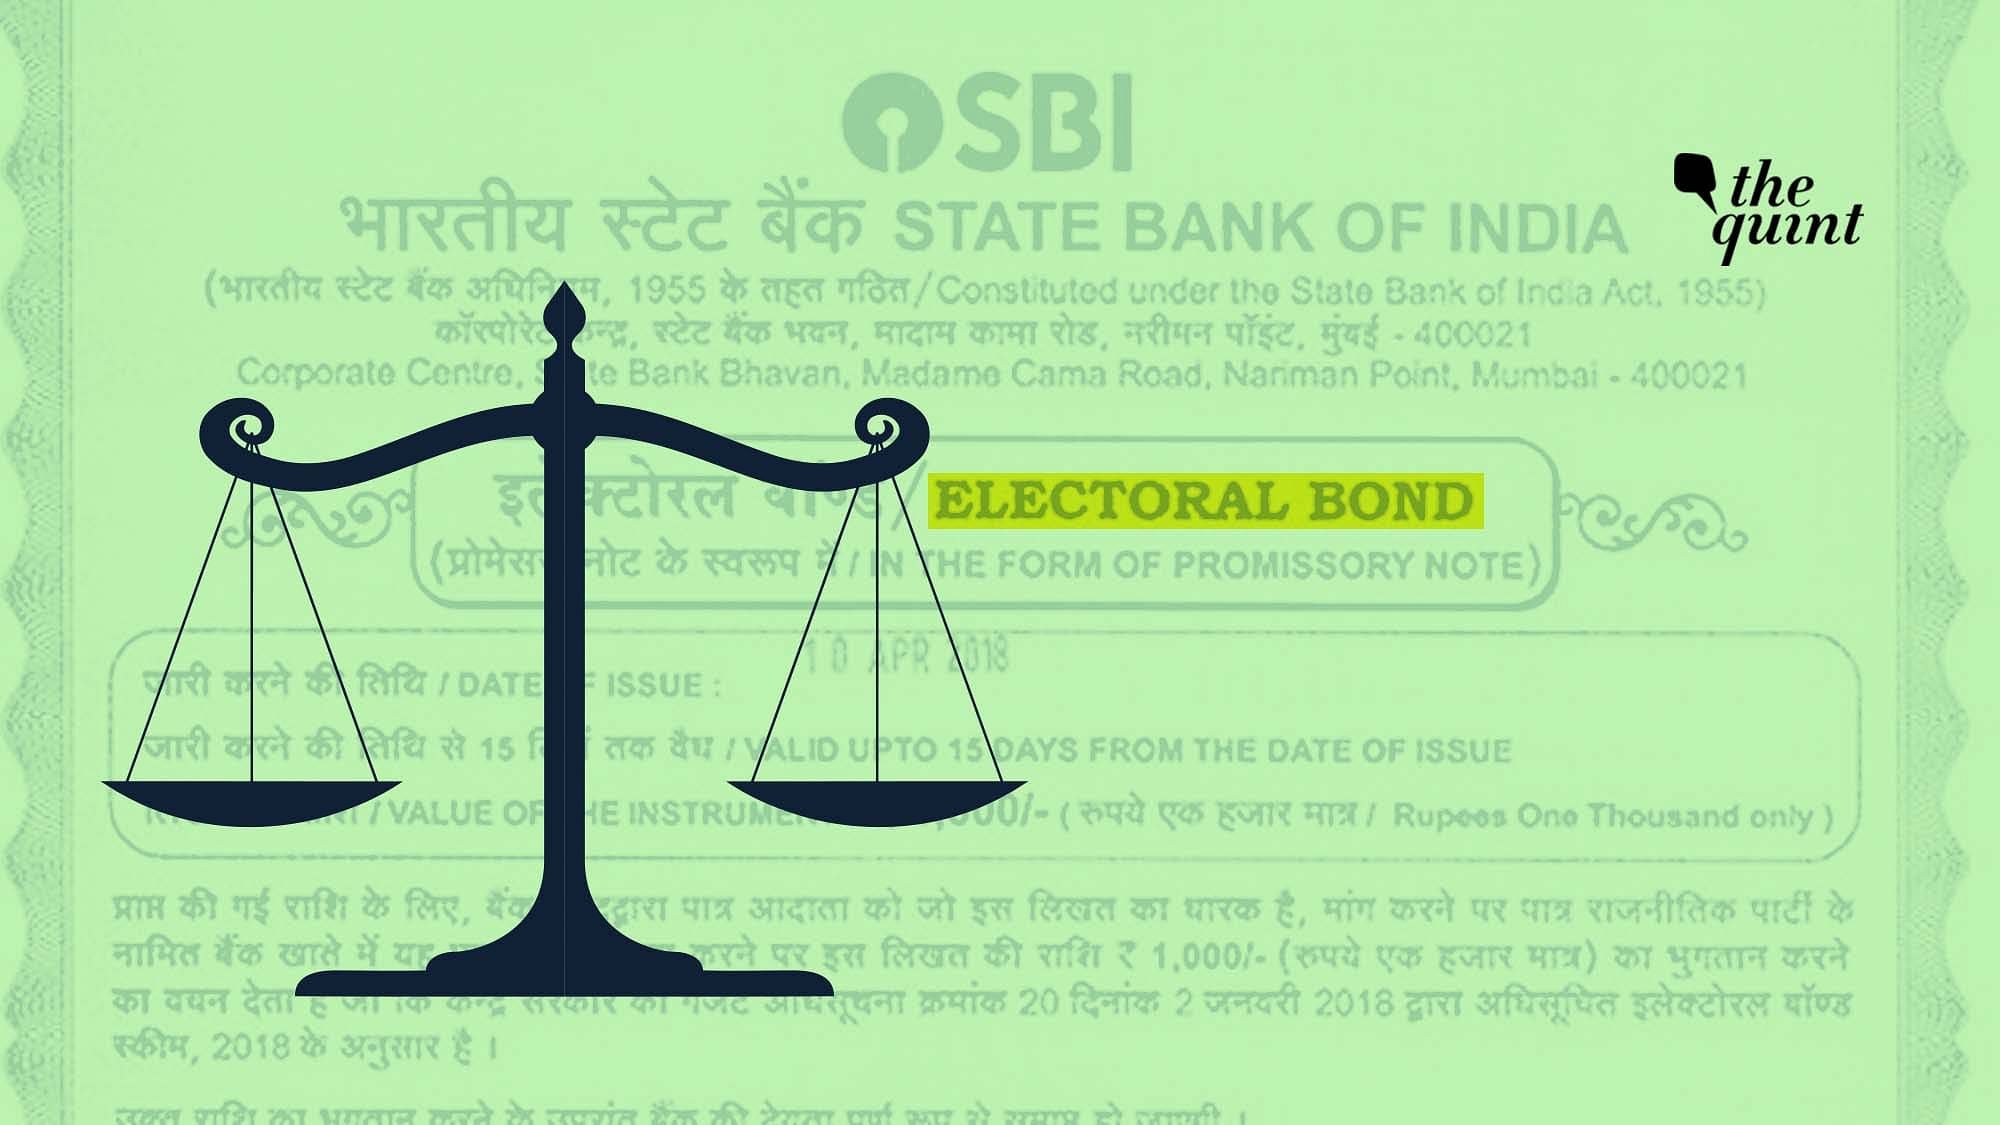 Law Ministry objected on issuing electoral bonds as promissory note which carried the danger of money laundering 